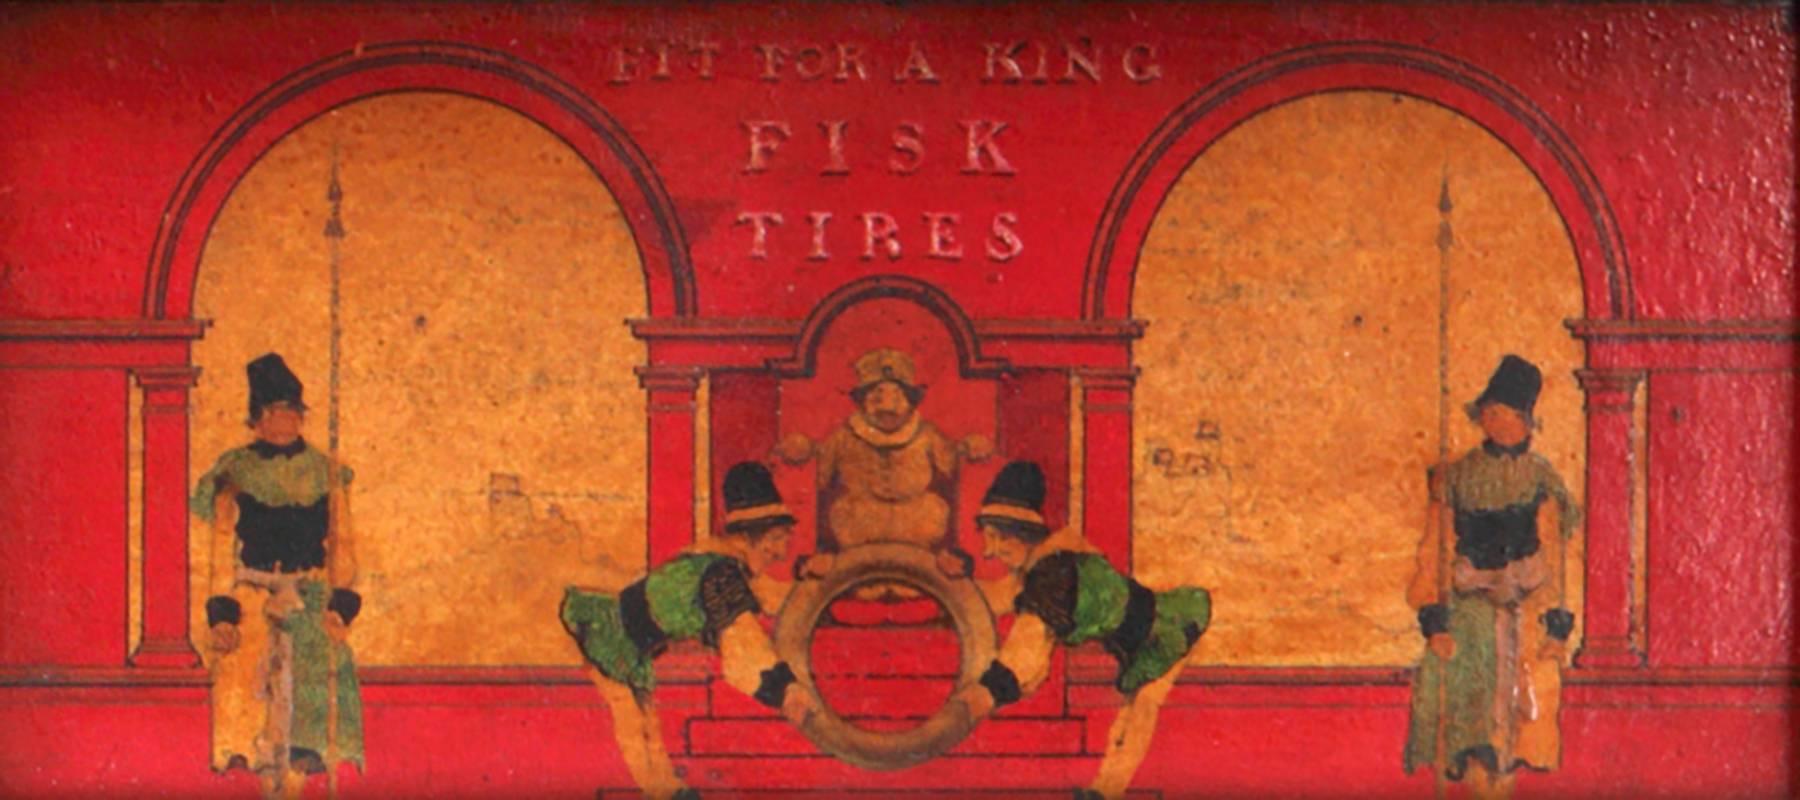 Maxfield Parrish Interior Painting - Sketch for Fisk Tires - Fit for a King